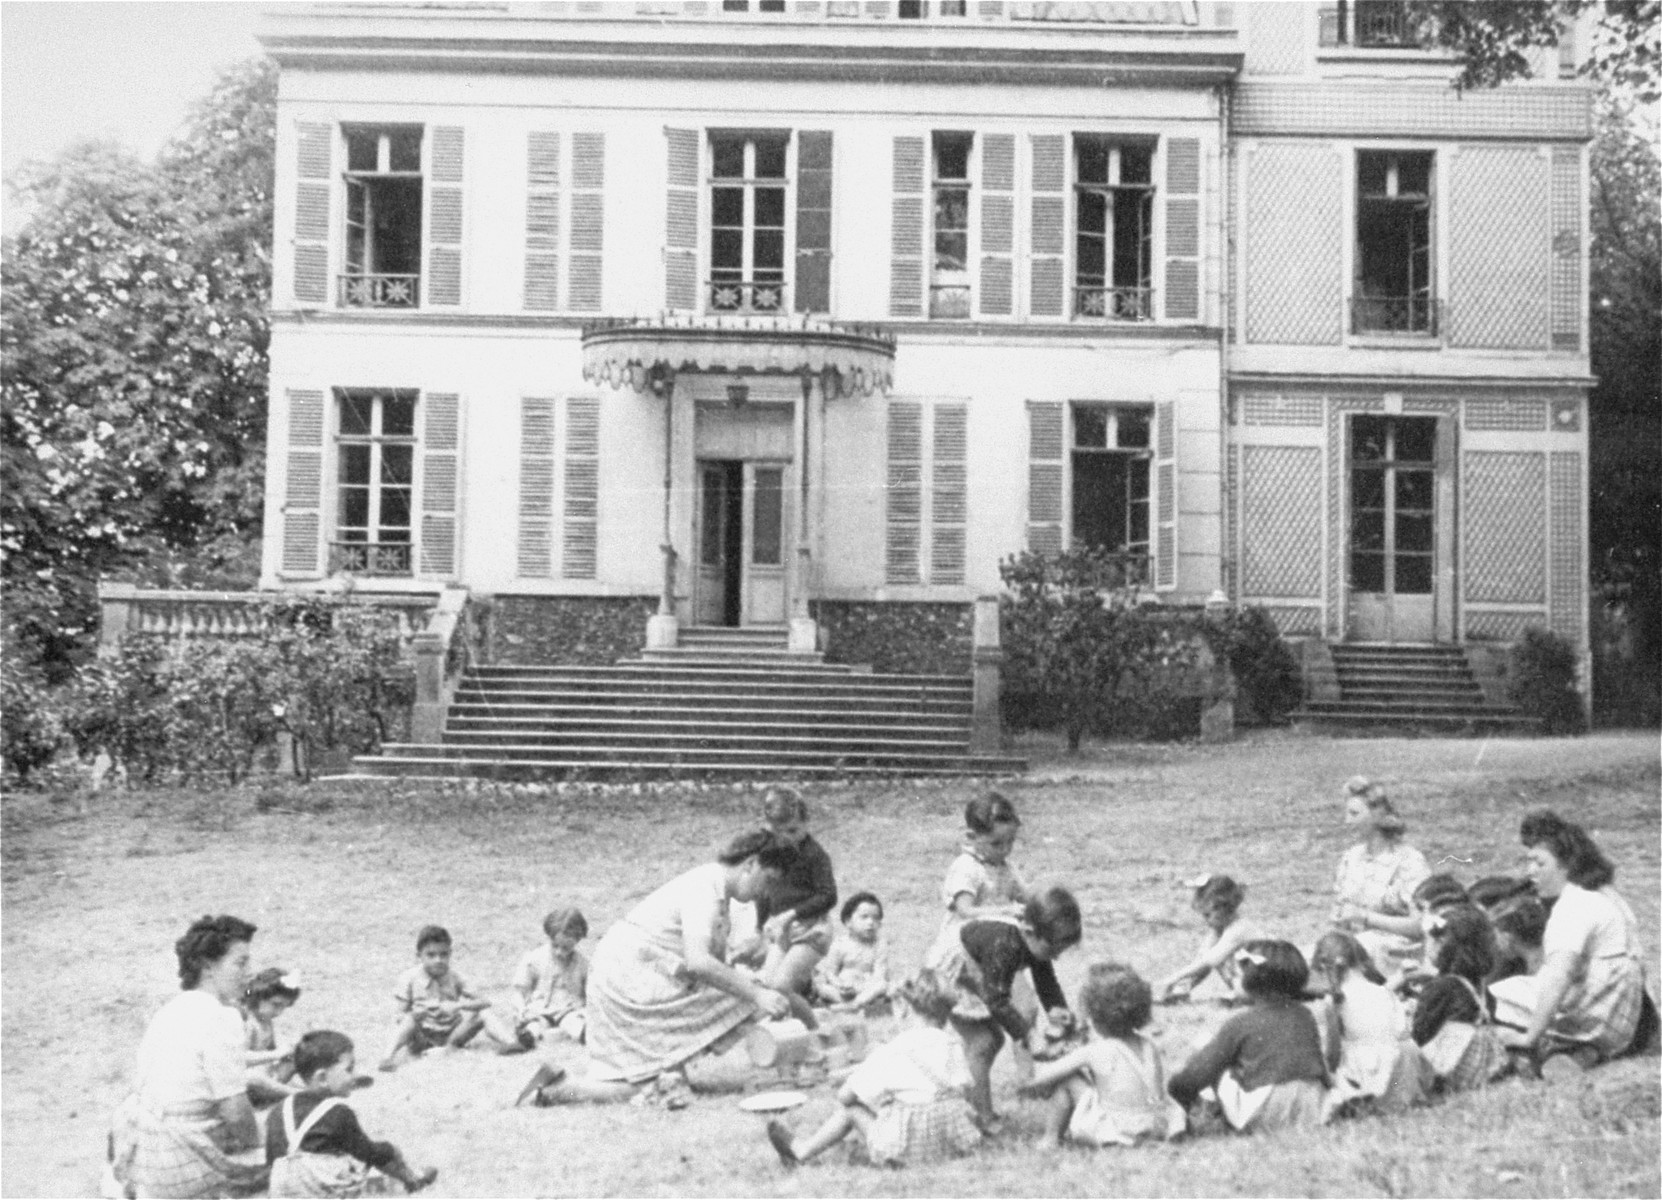 Children at play in the yard of Le Petite Monde children's home.